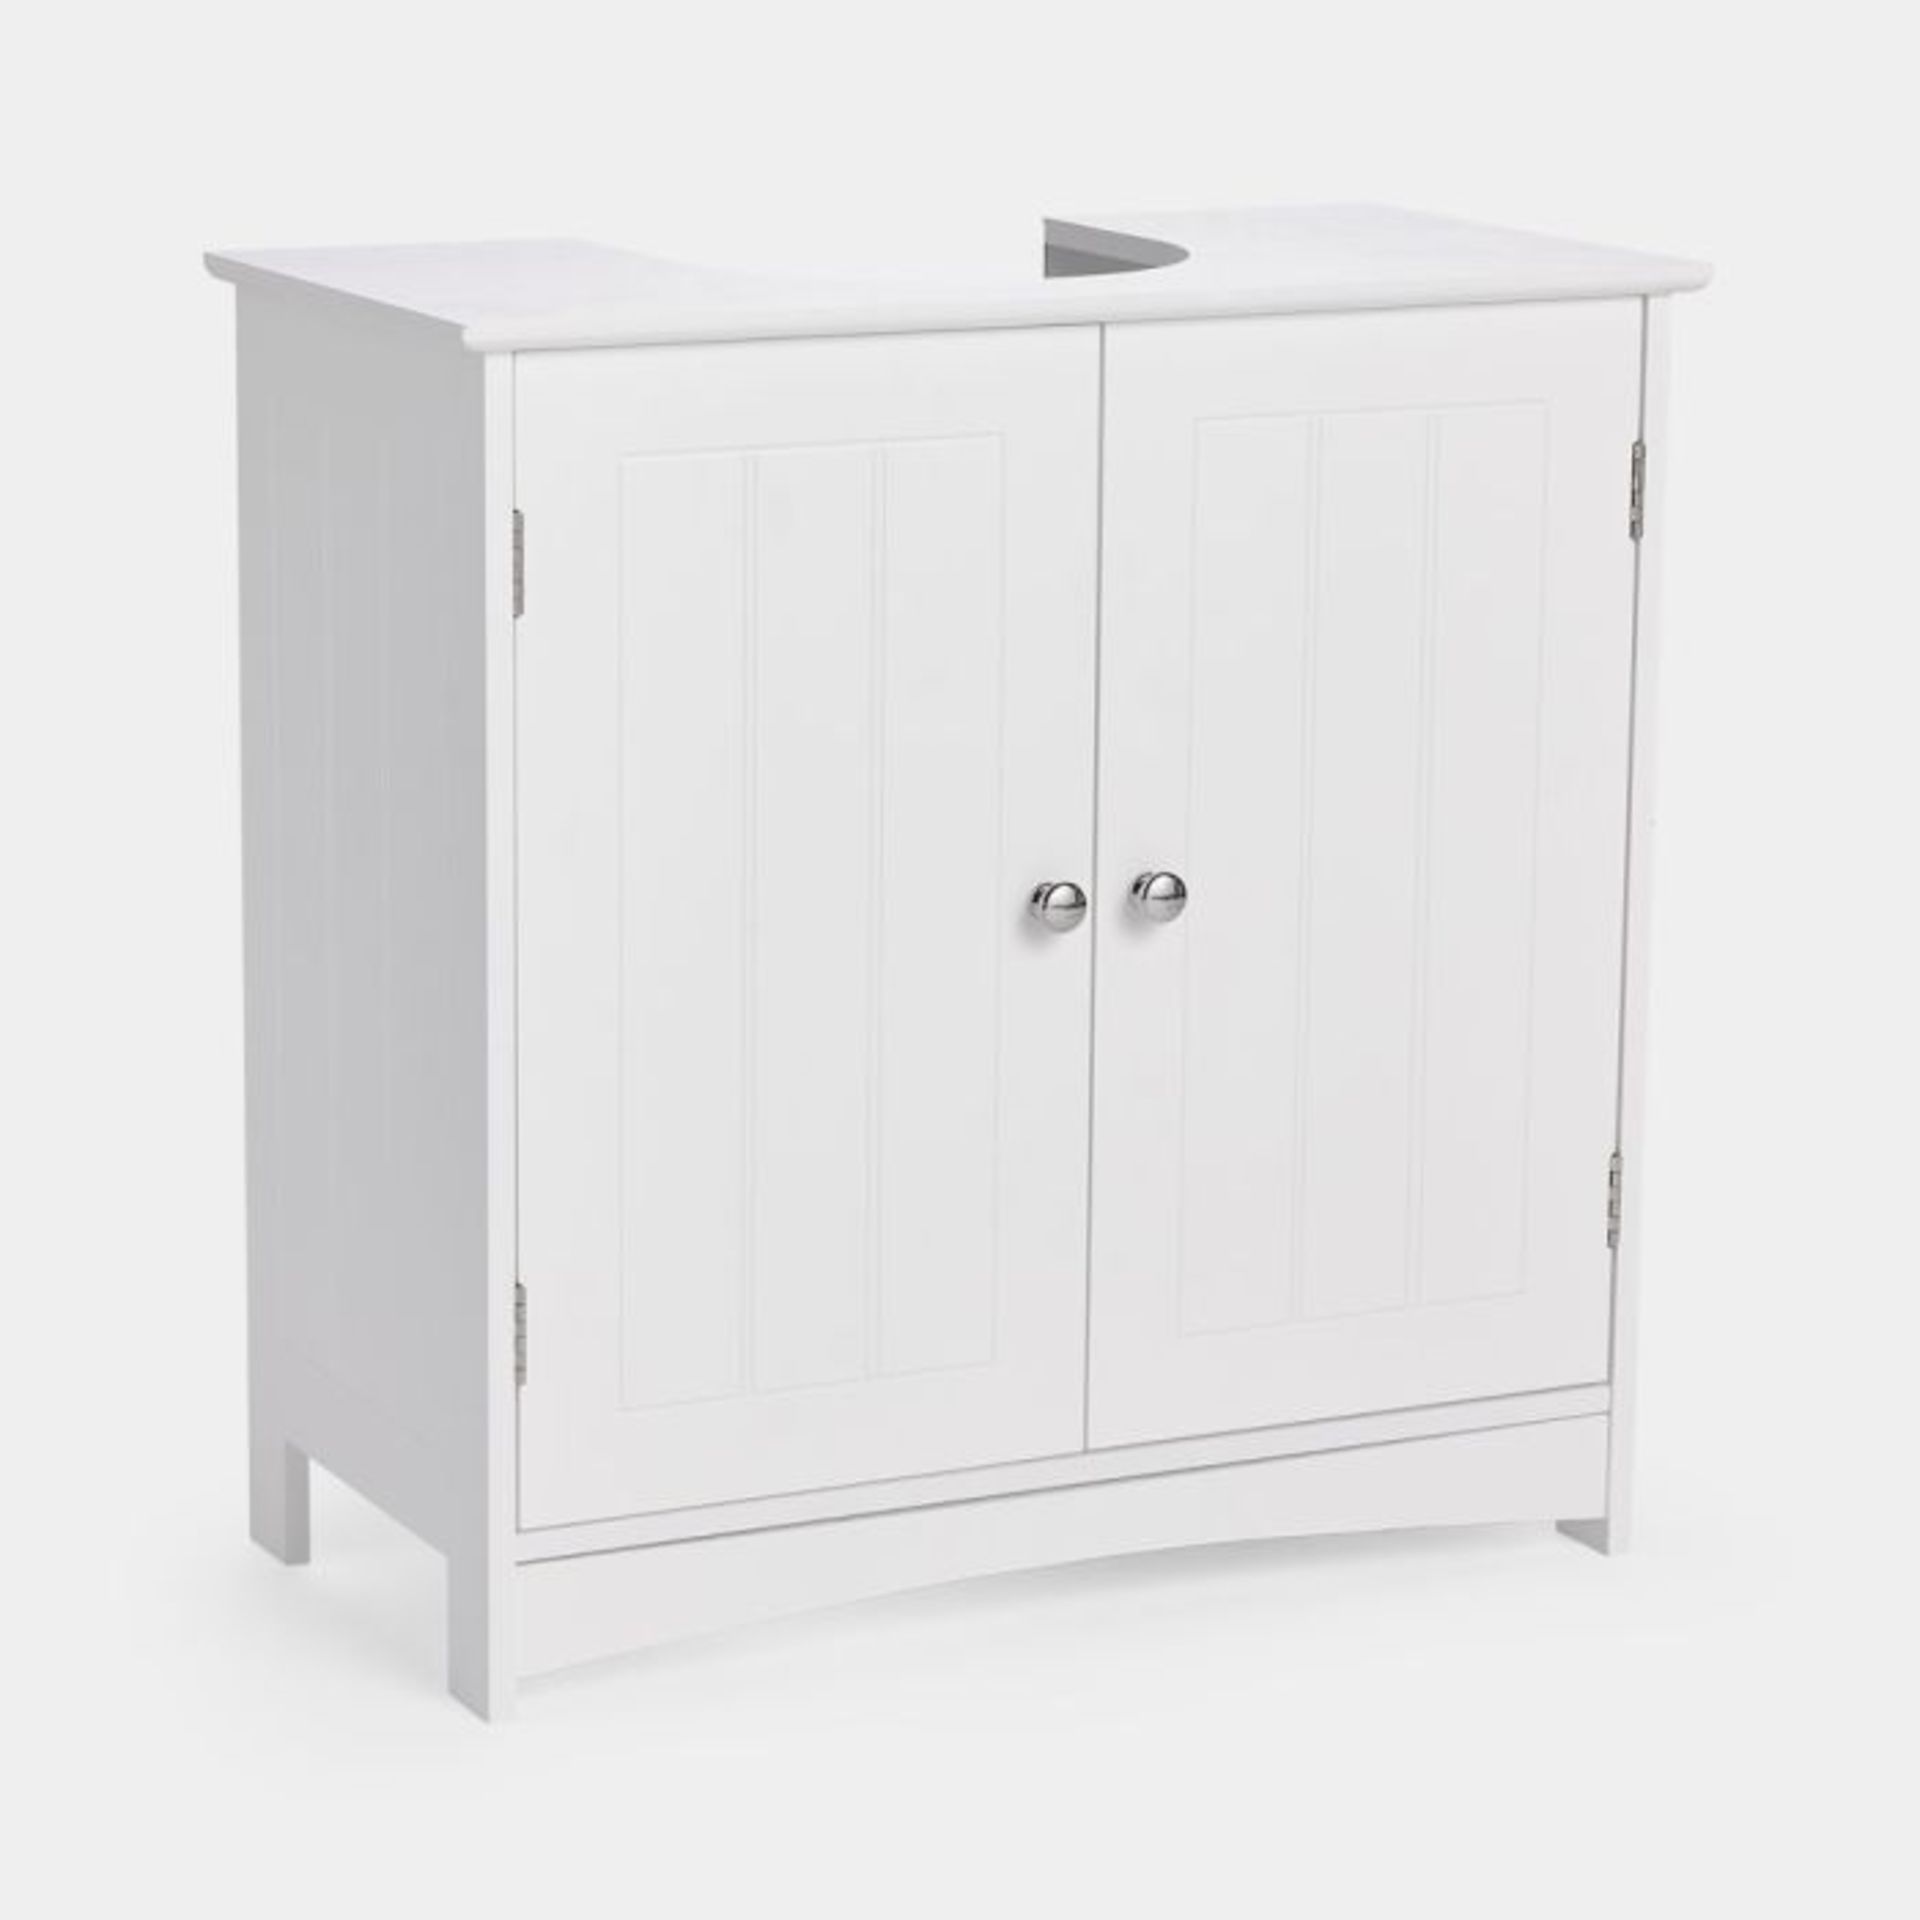 Holbrook White Under Sink Basin Cabinet. - ER33. Featuring chrome handles and made from tough MDF